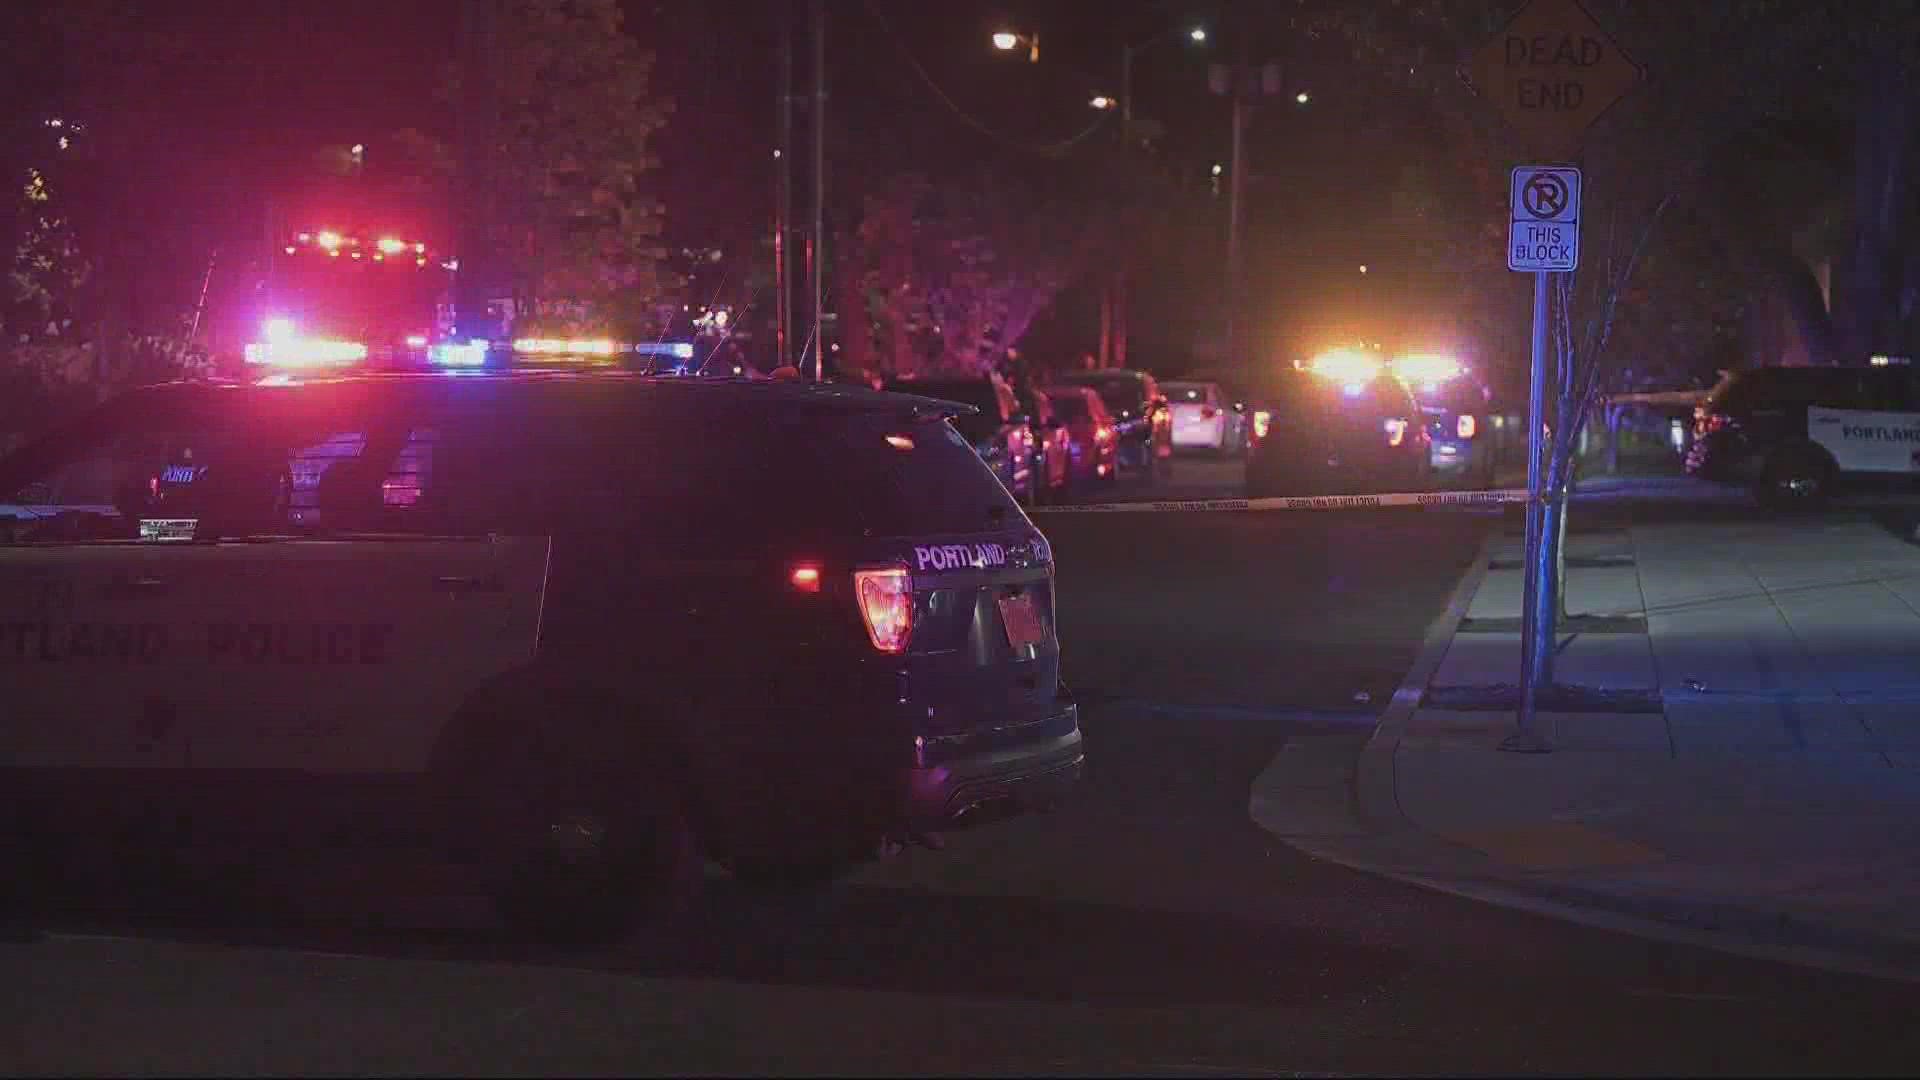 A man died and a woman was injured after a stabbing in Northeast Portland early Monday morning. Police say a man was detained as part of the investigation.